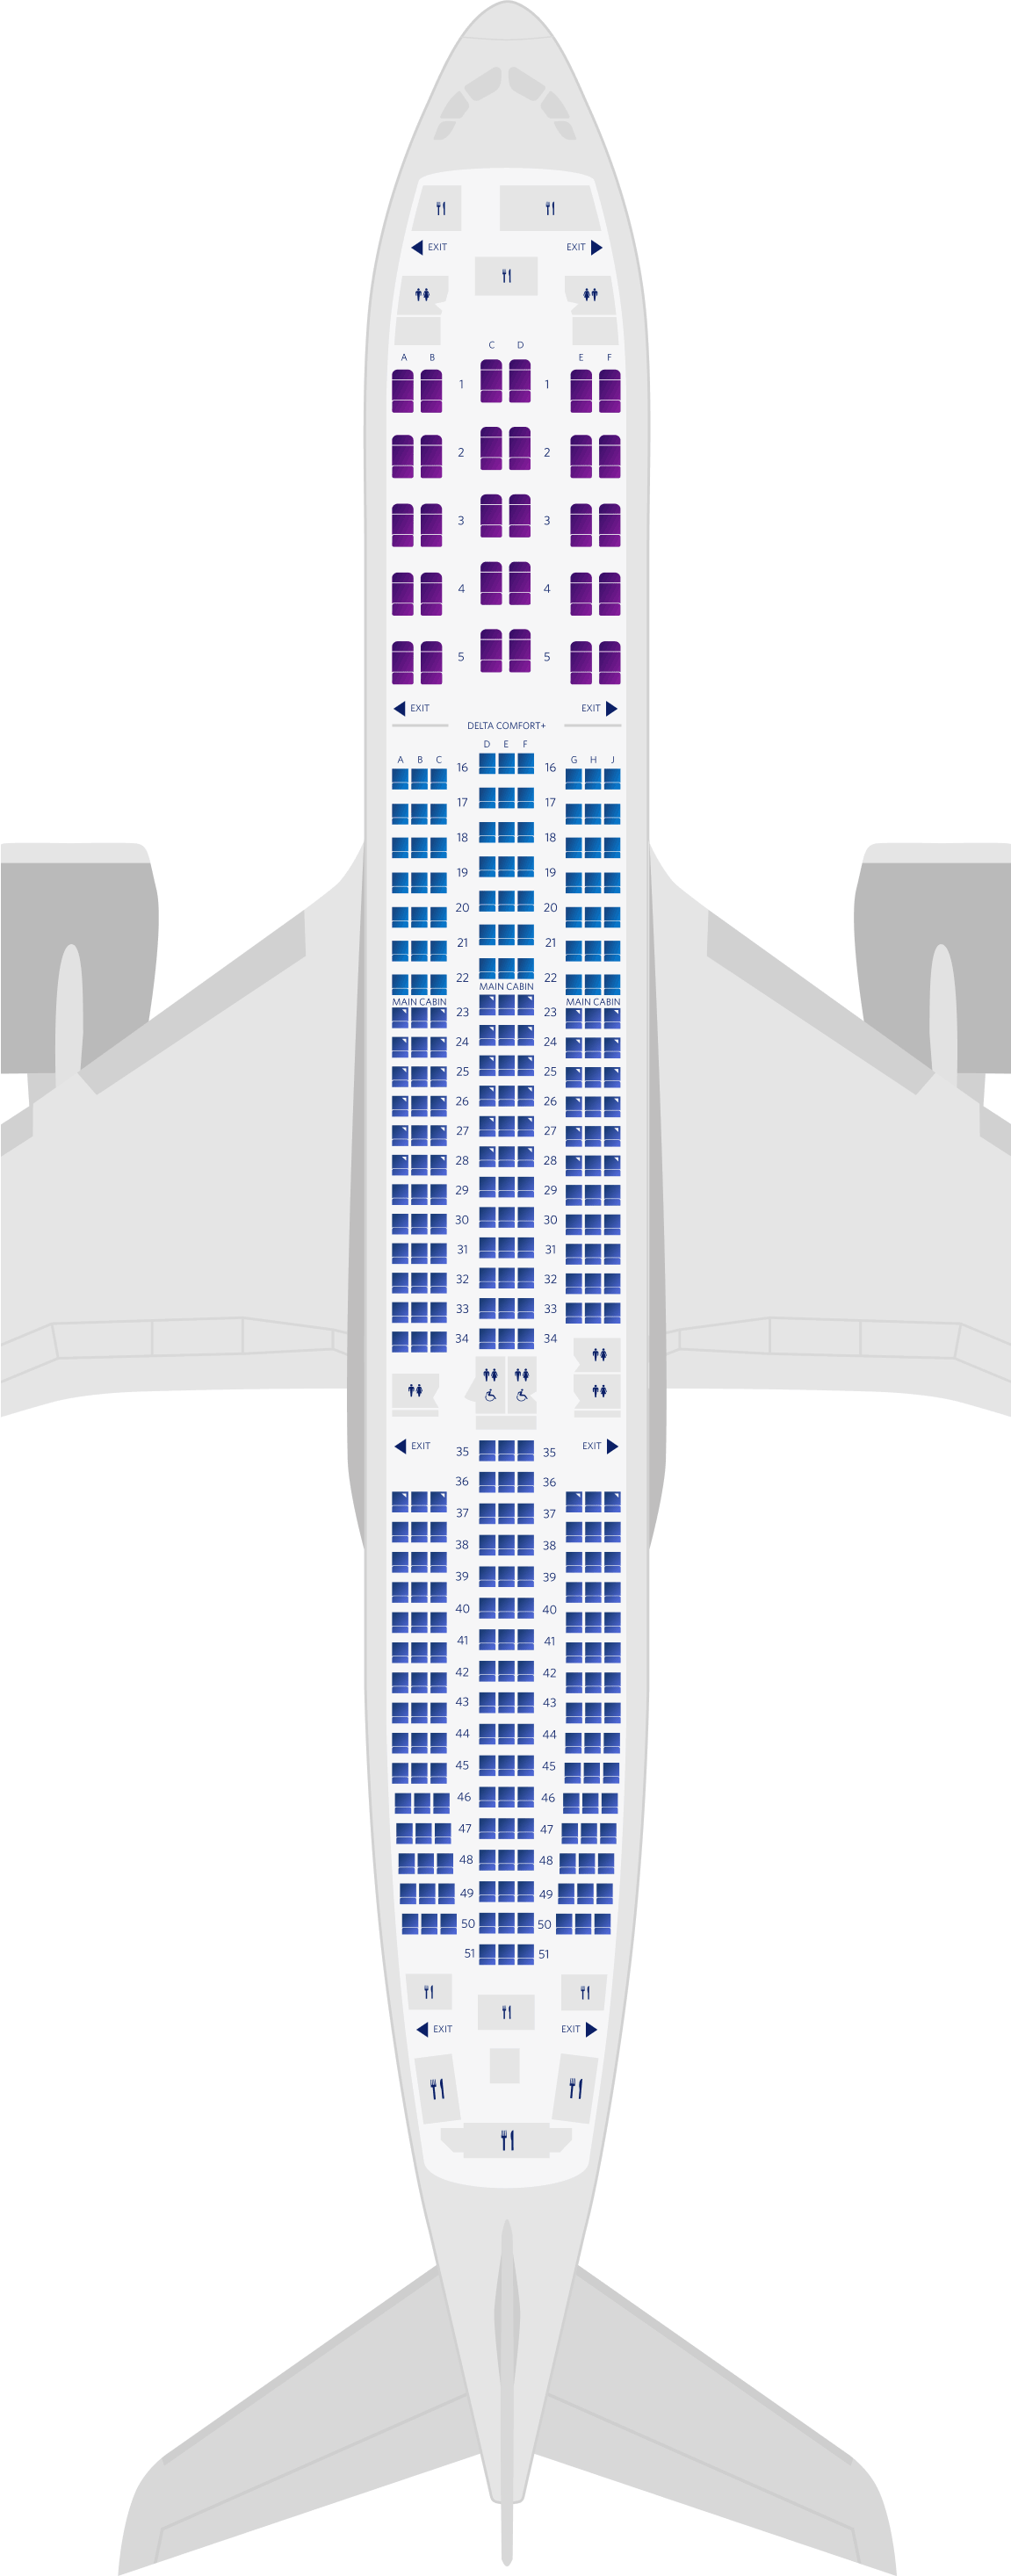 Delta Airbus Seating Map Hot Sex Picture